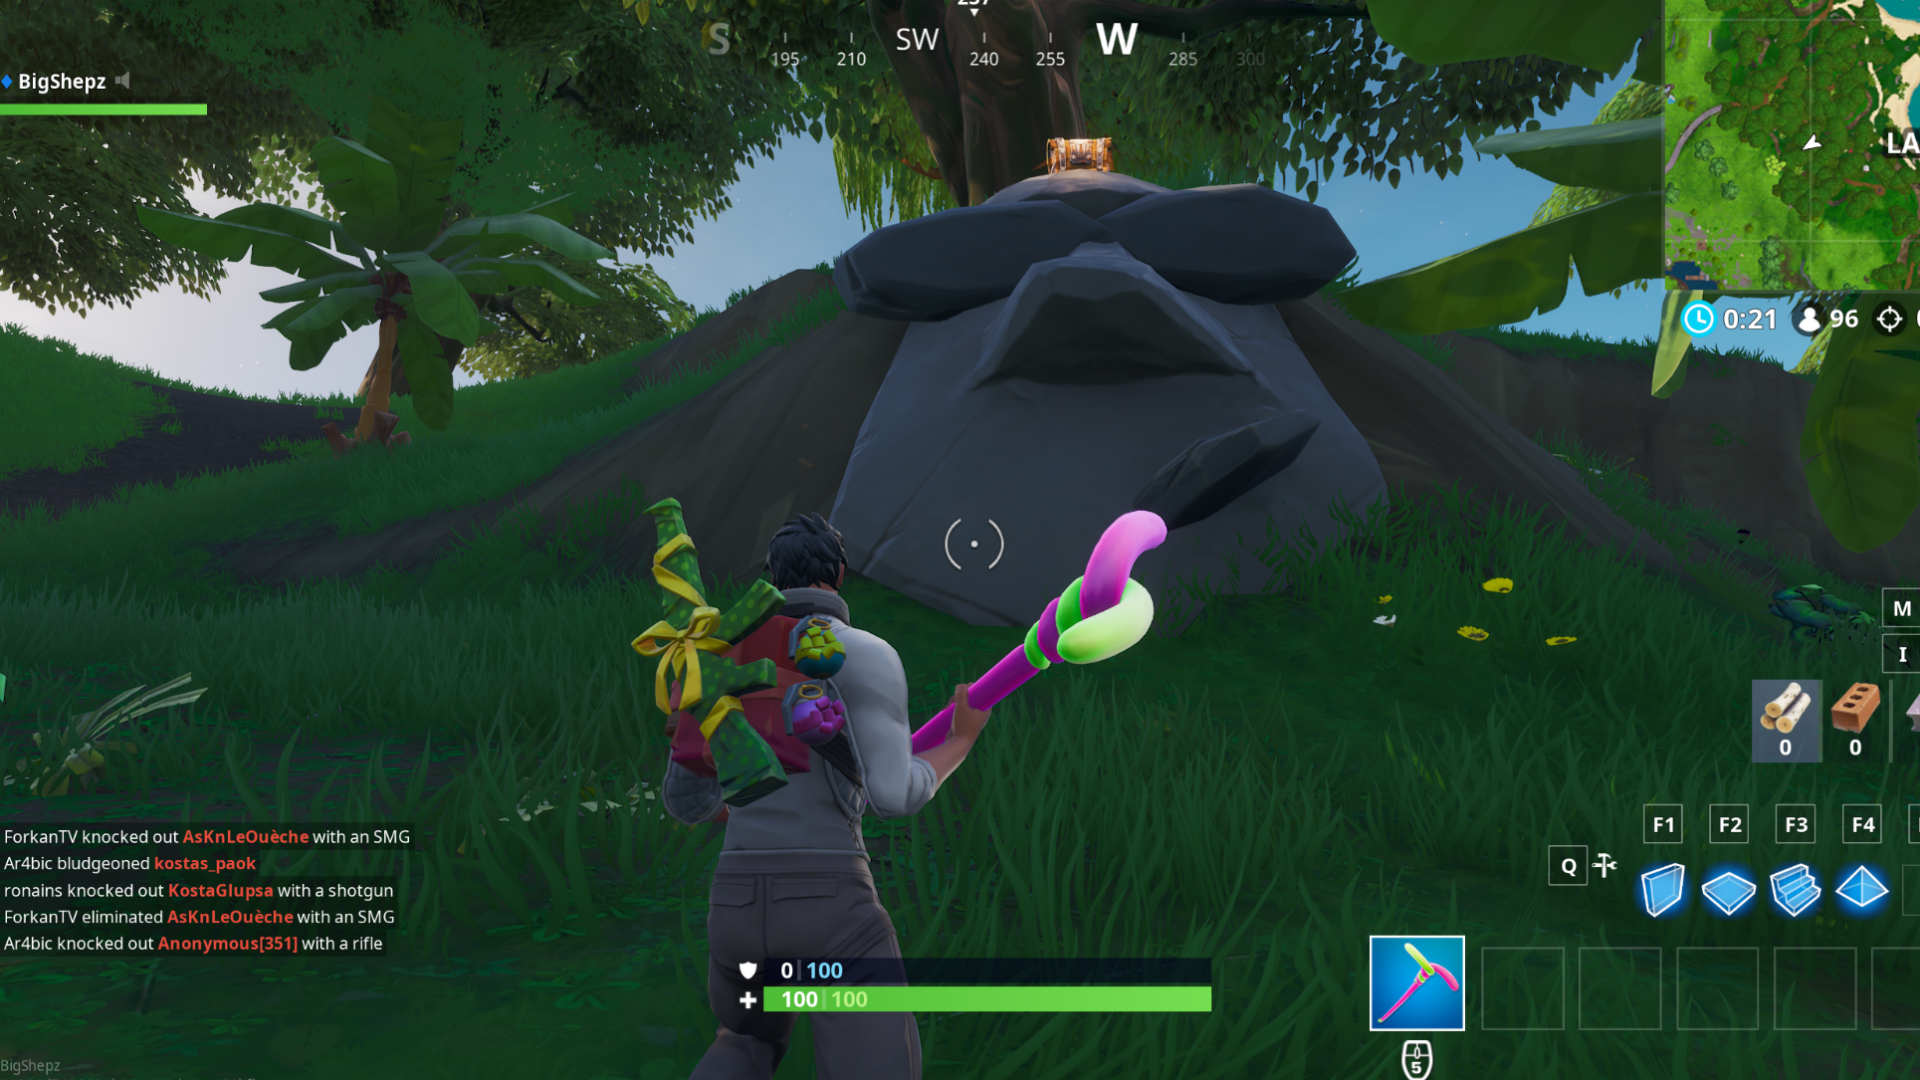 Giant Faces In Fortnite Golfclub - fortnite jungle giant face location where to visit a